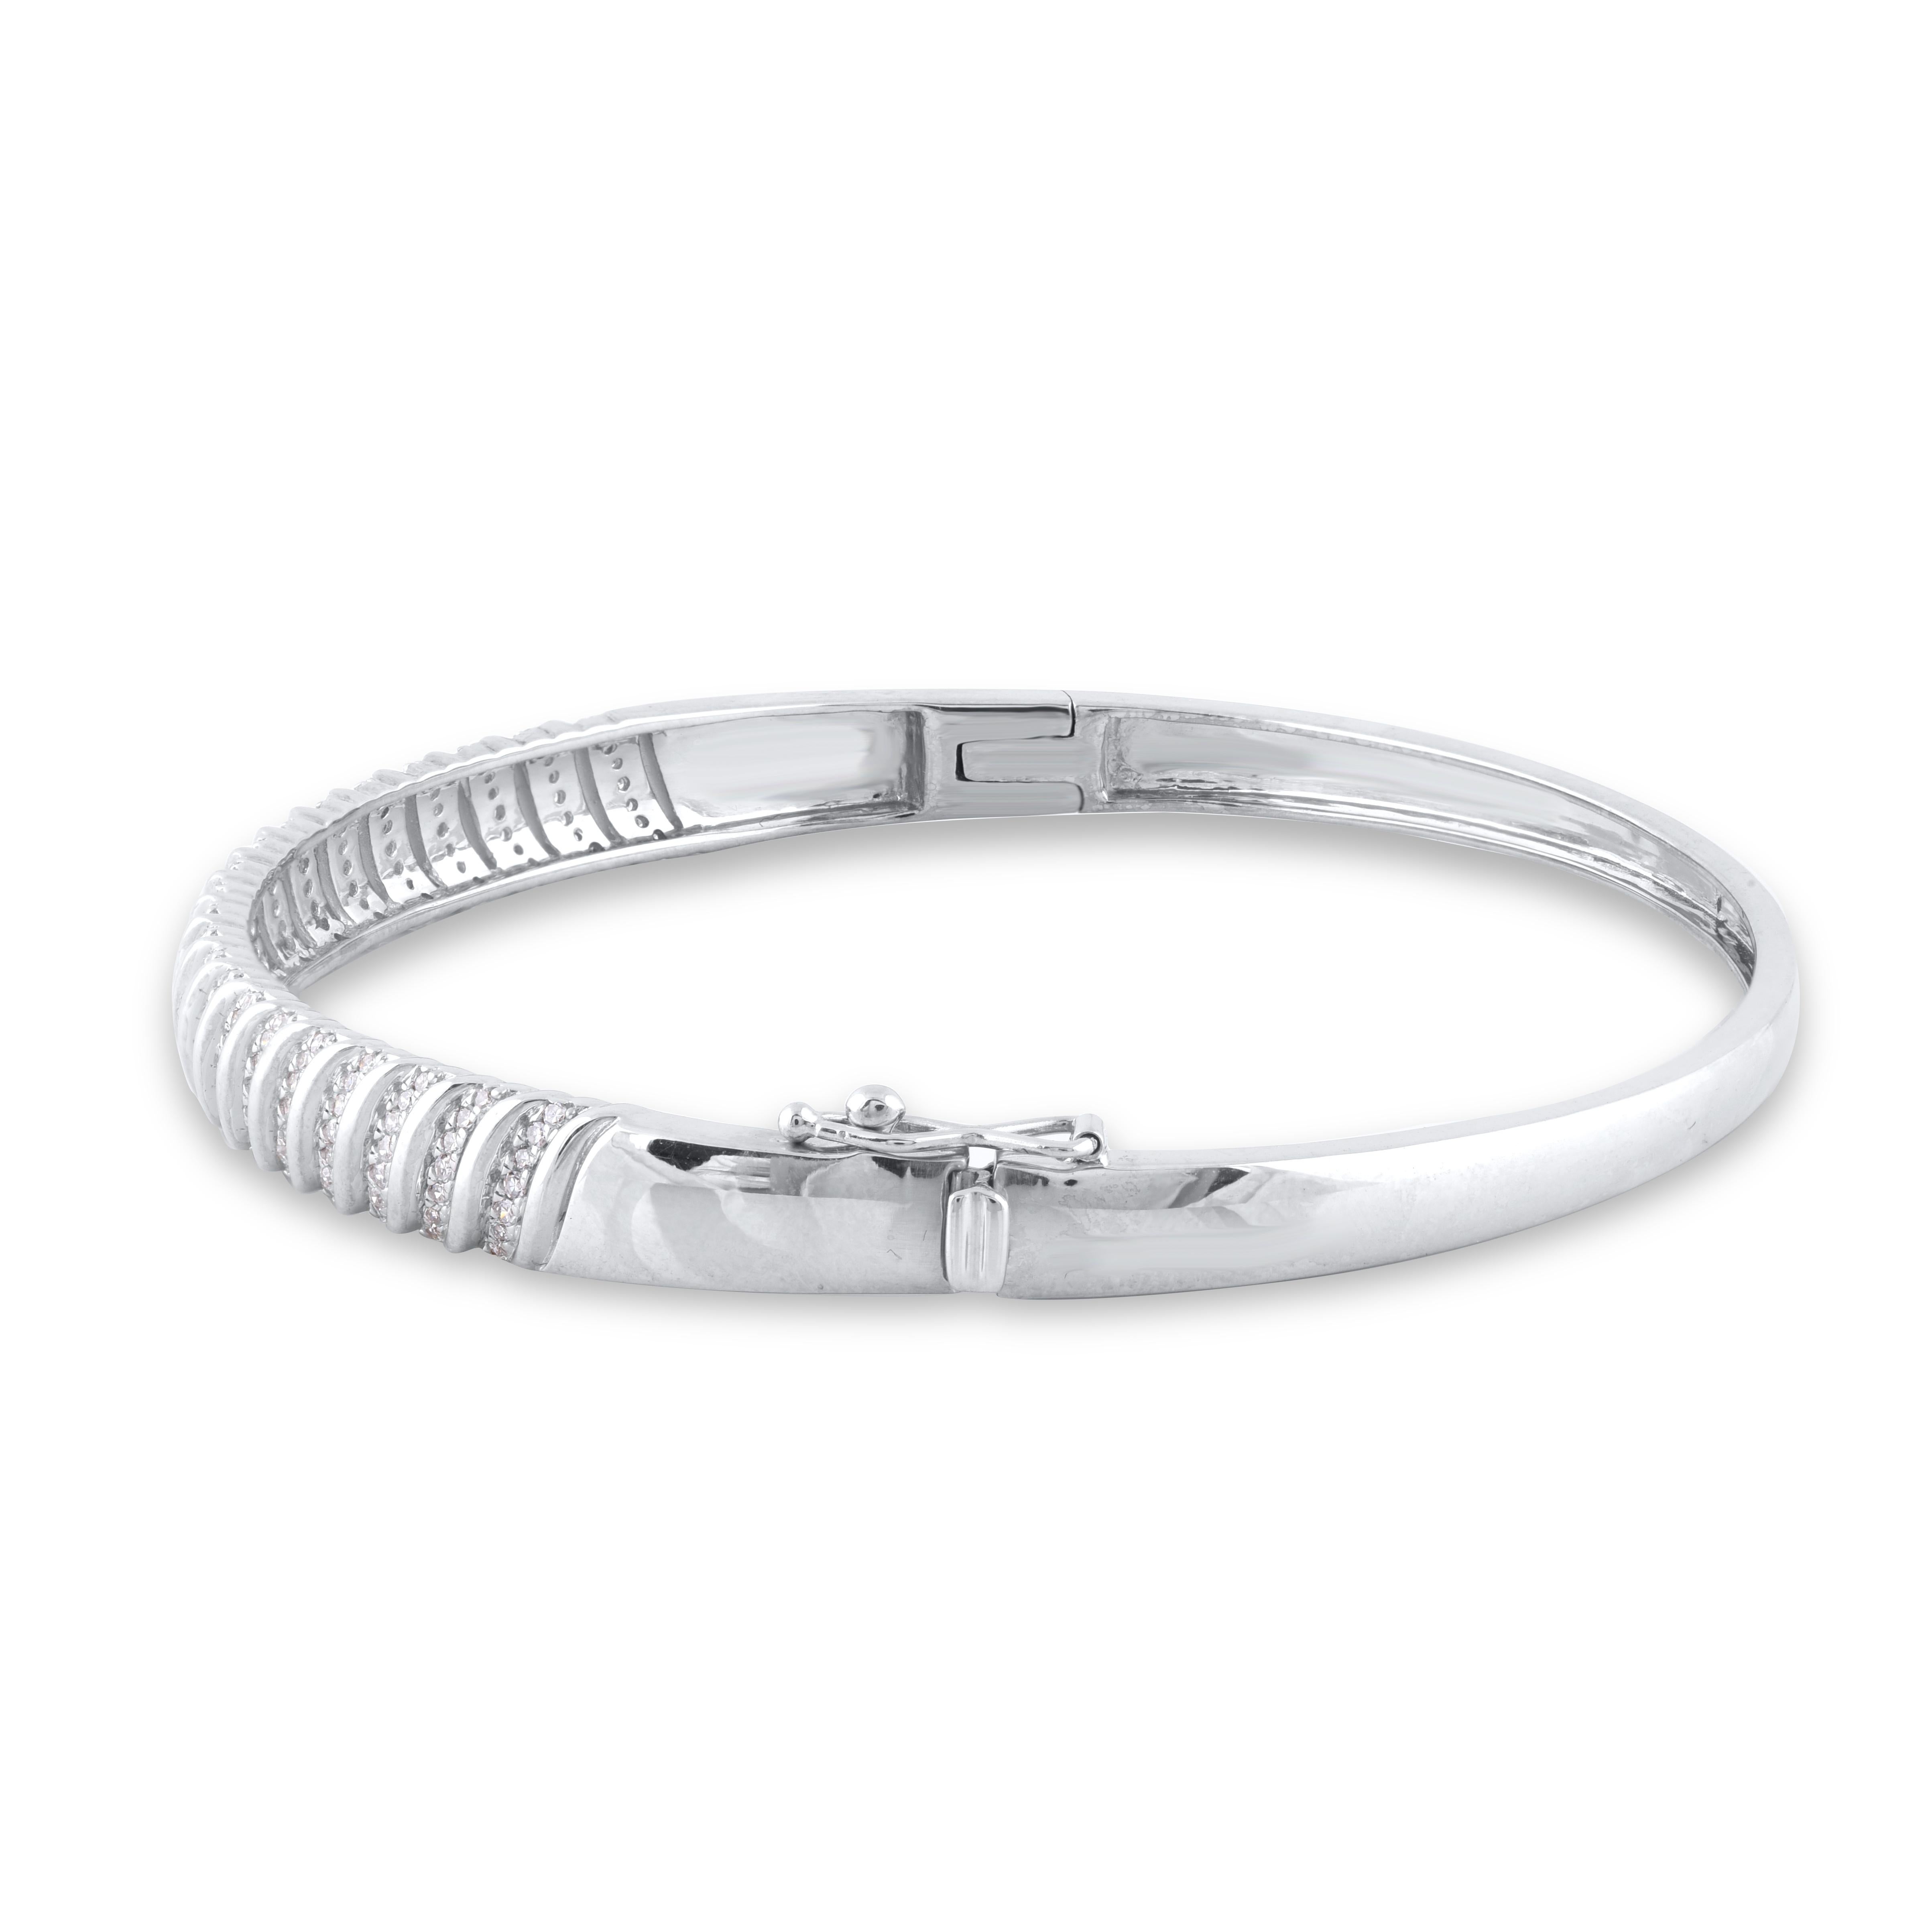 Express your sophisticated style with this gorgeous diamond bangle bracelet. This bangle bracelet features 147 natural single cut diamonds in prong setting and crafted in 14 karat white gold. The total diamond weight is 0.50 carat. Diamonds are